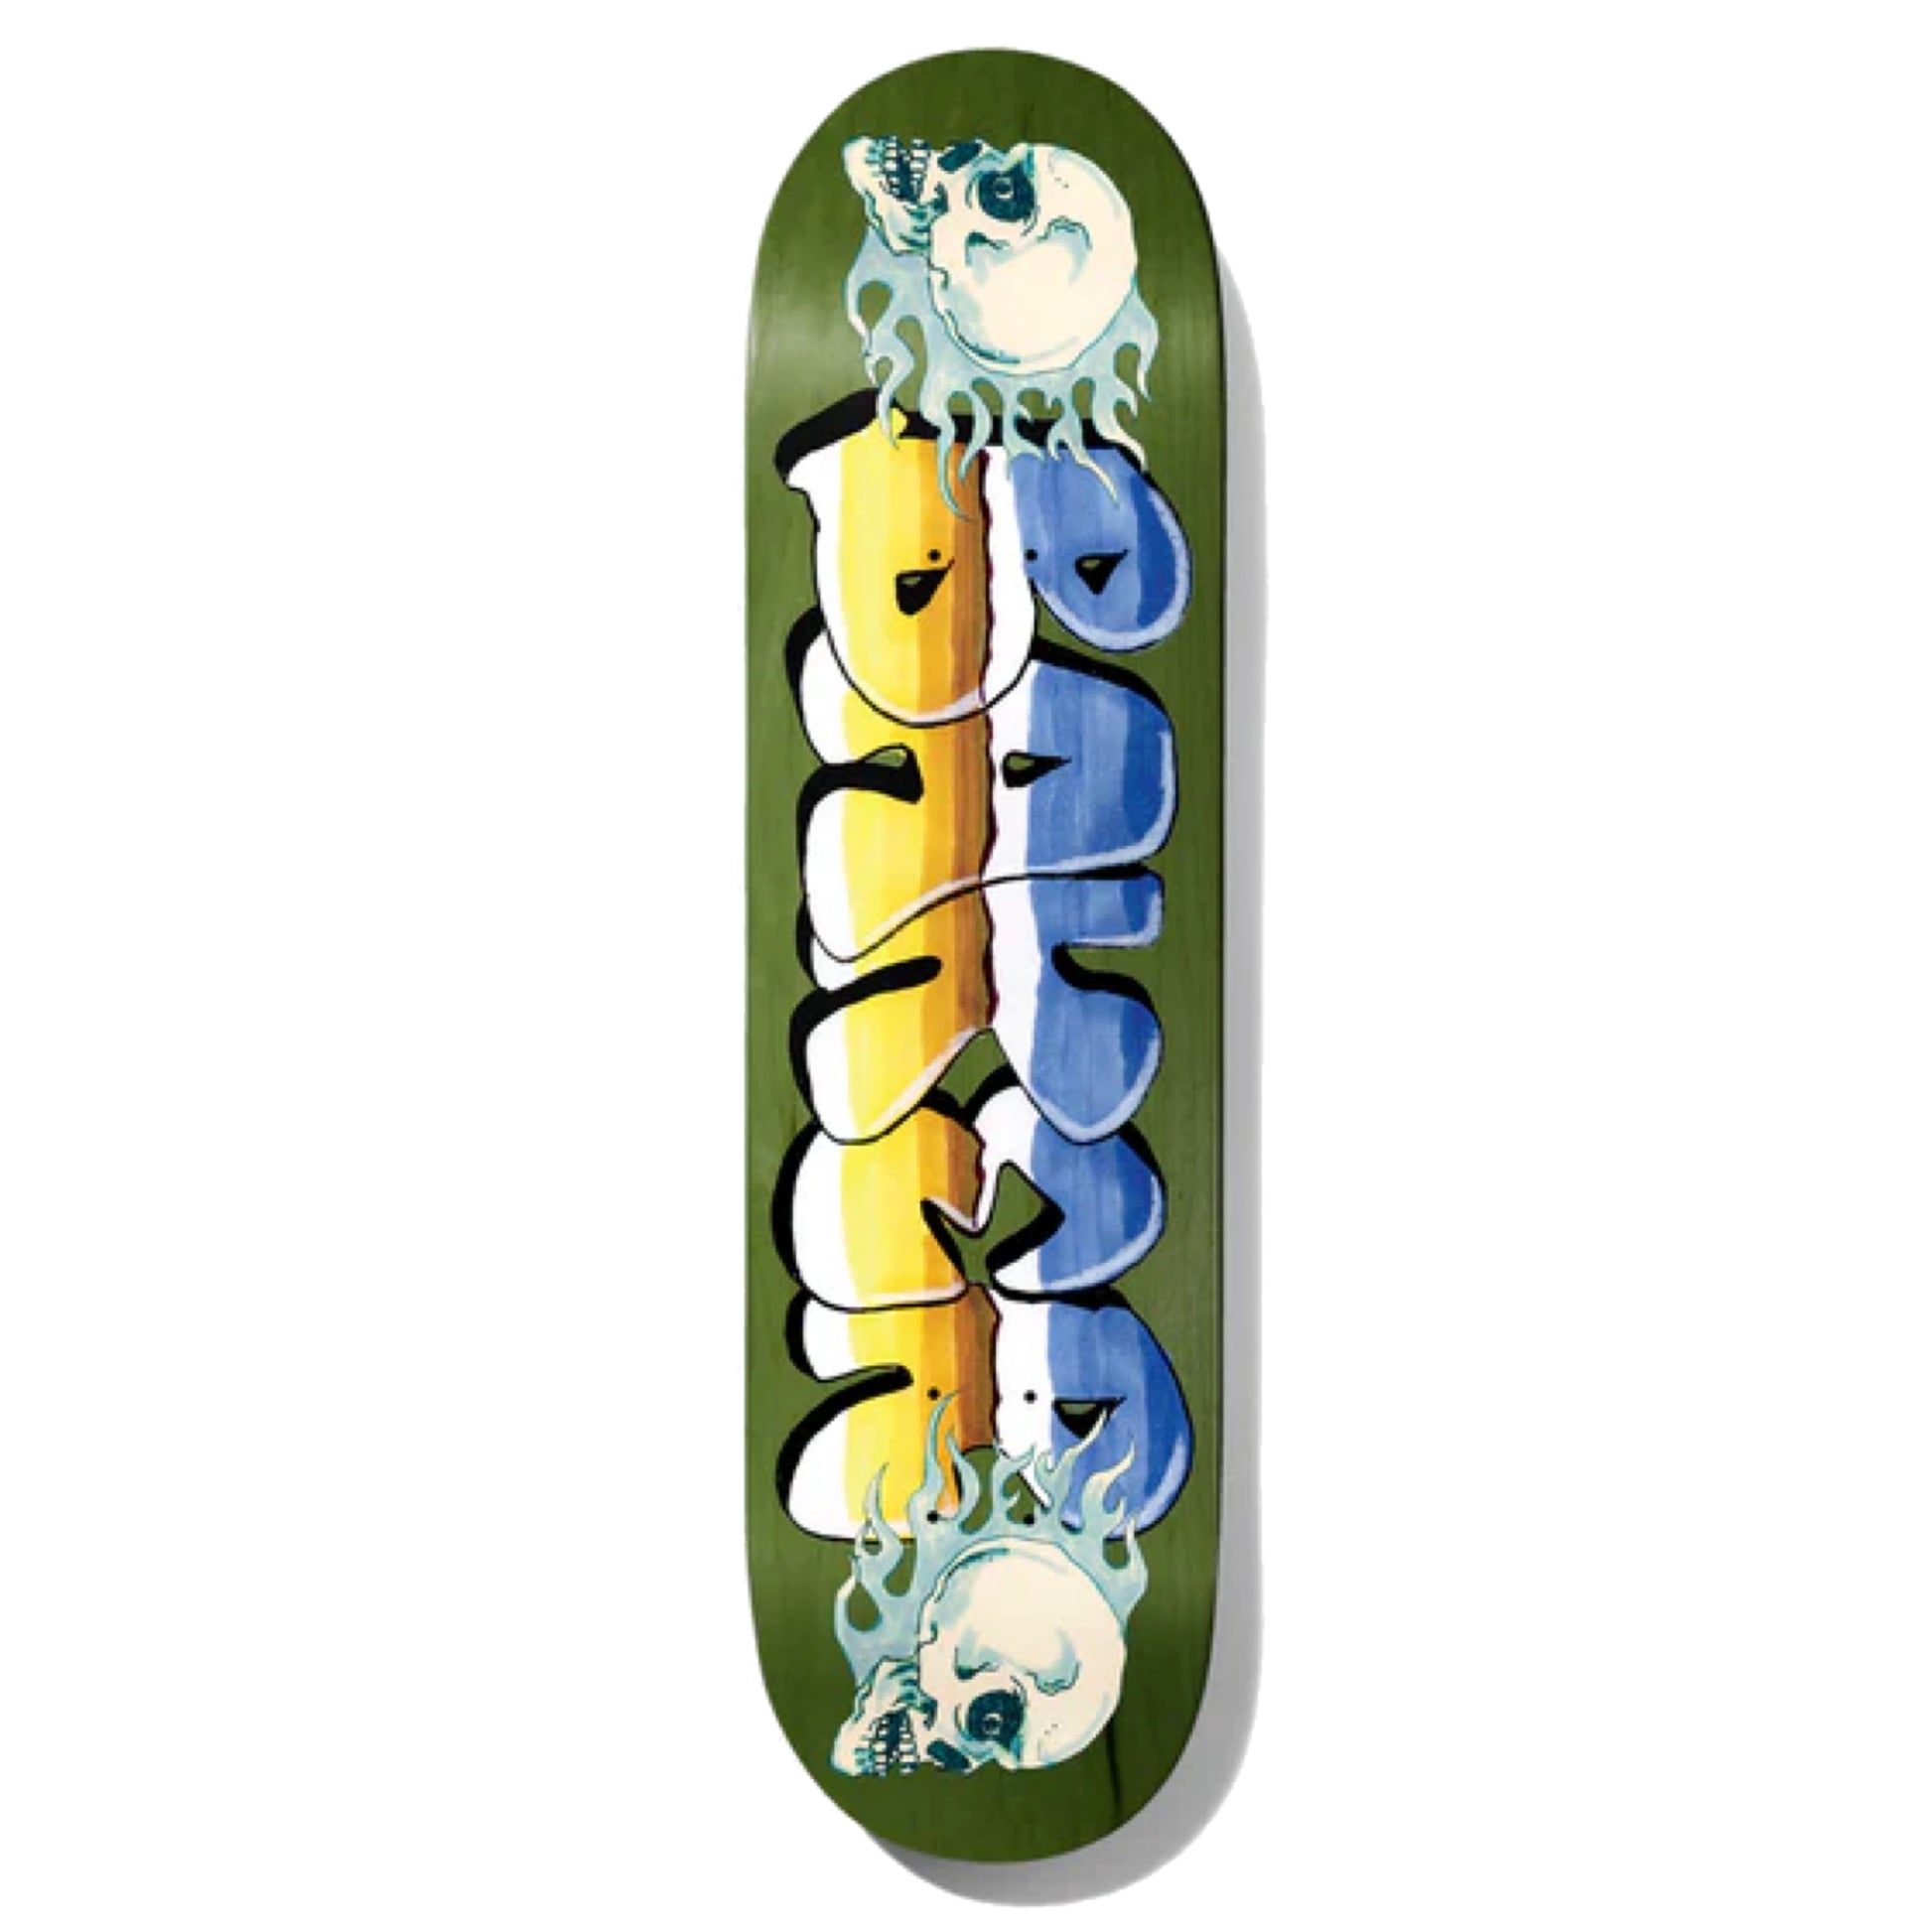 Baker T-Funk Faster Skateboard Deck; Forest green background; Blue, yellow, and white lettering spells out “Baker”; Graphic illustration white skulls and light blue flames on both sides of lettering